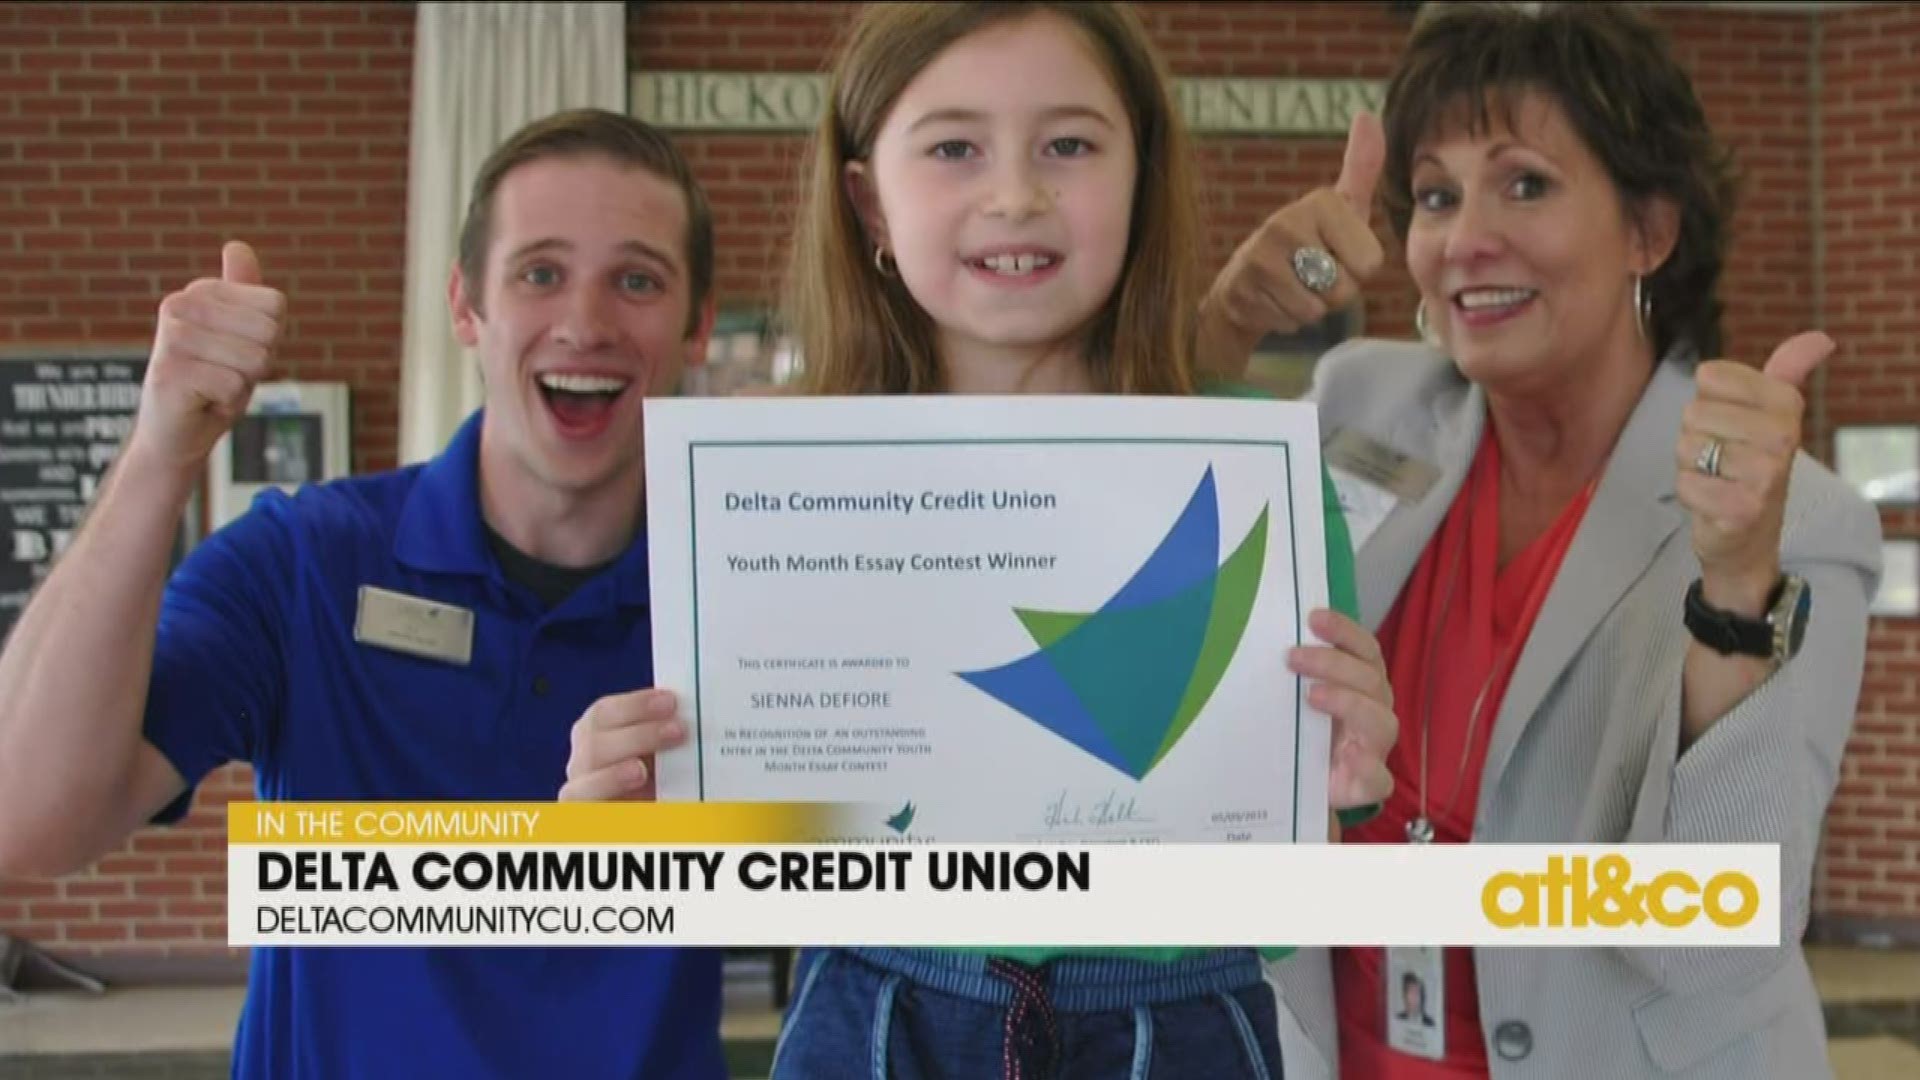 See how Delta Community Credit Union gives back through its many initiatives.